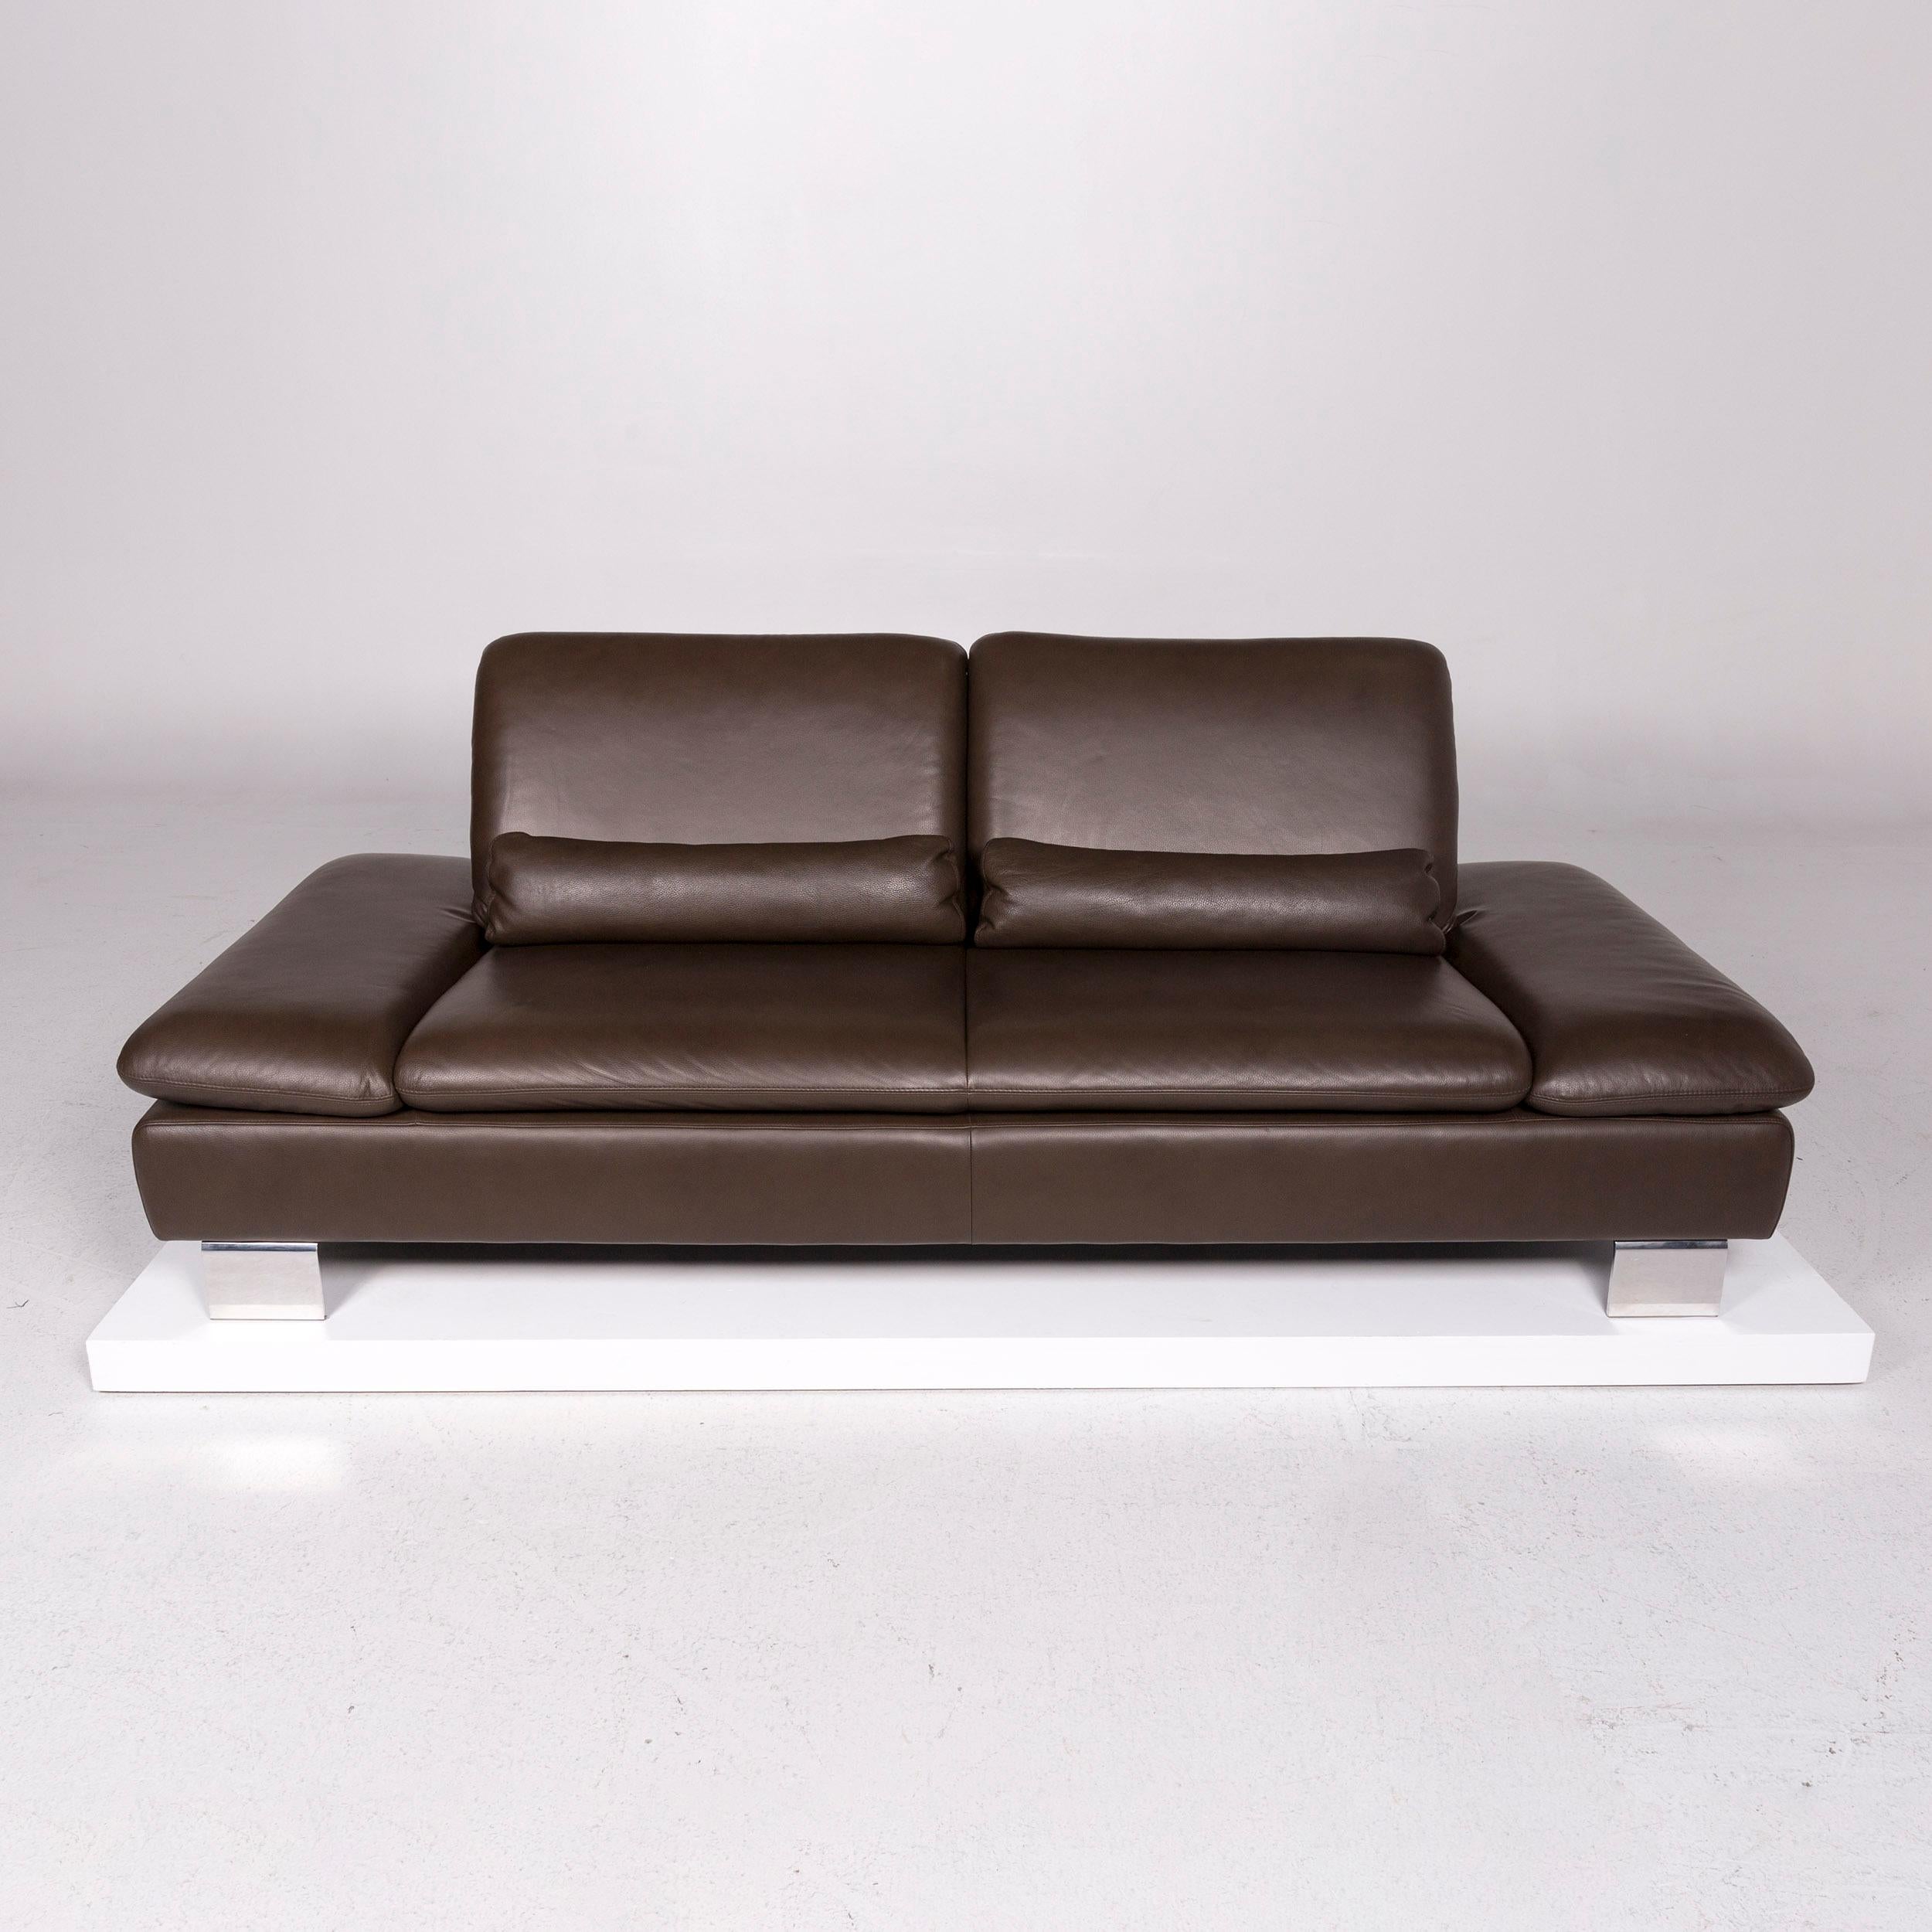 Contemporary Willi Schillig Leather Sofa Brown Dark Brown Three-Seat Function Couch